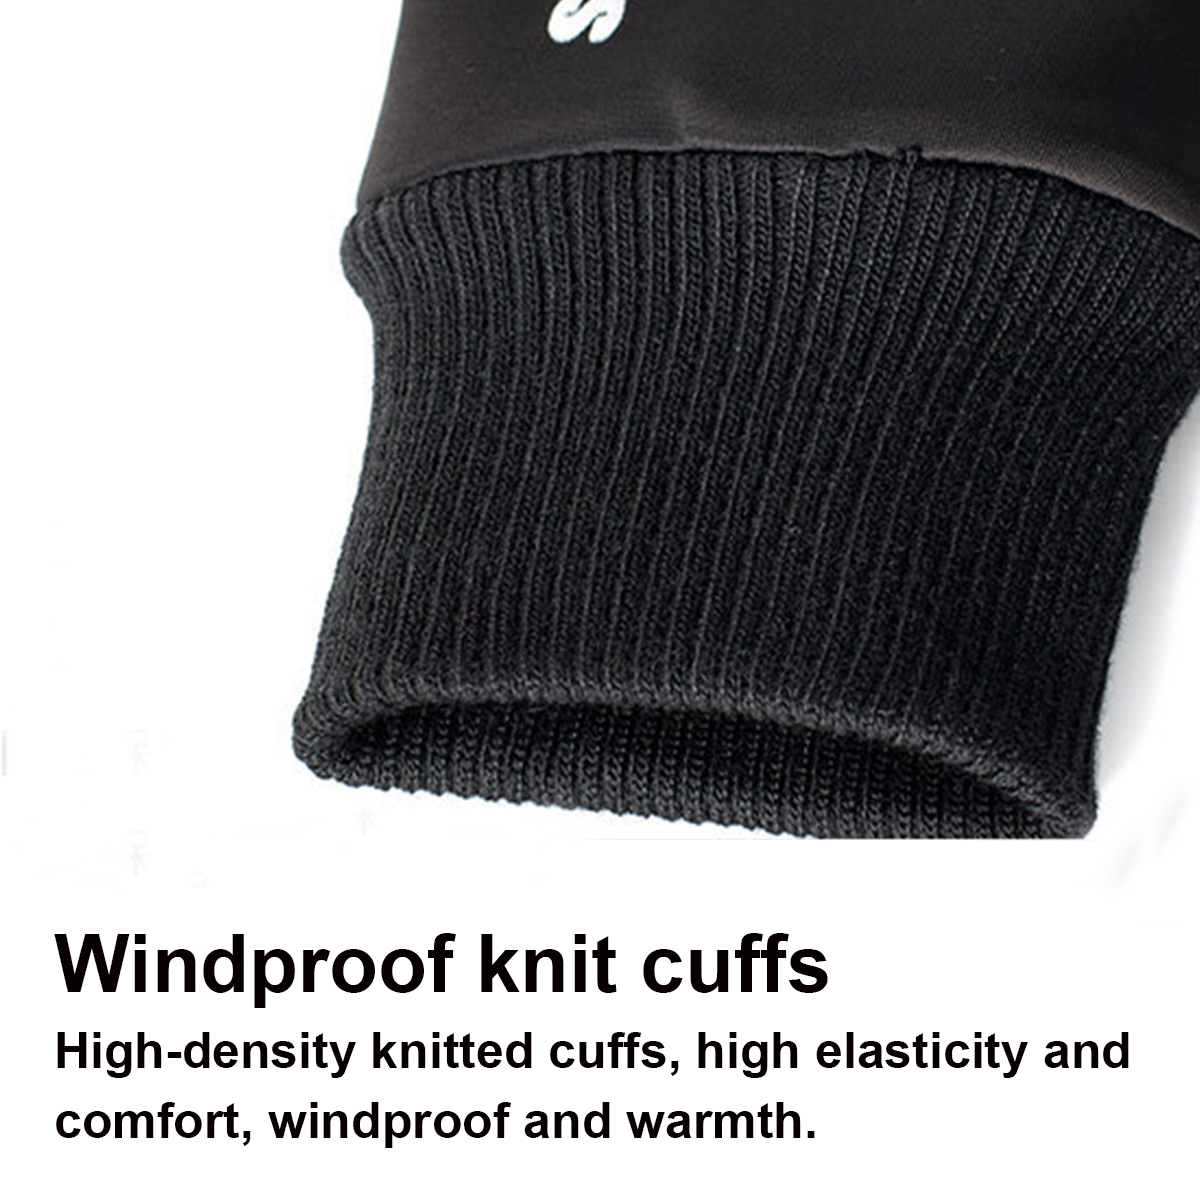 Winter-Warm-Waterproof-Windproof-Anti-Slip-Touch-Screen-Outdoors-Motorcycle-Riding-Gloves-1781887-7